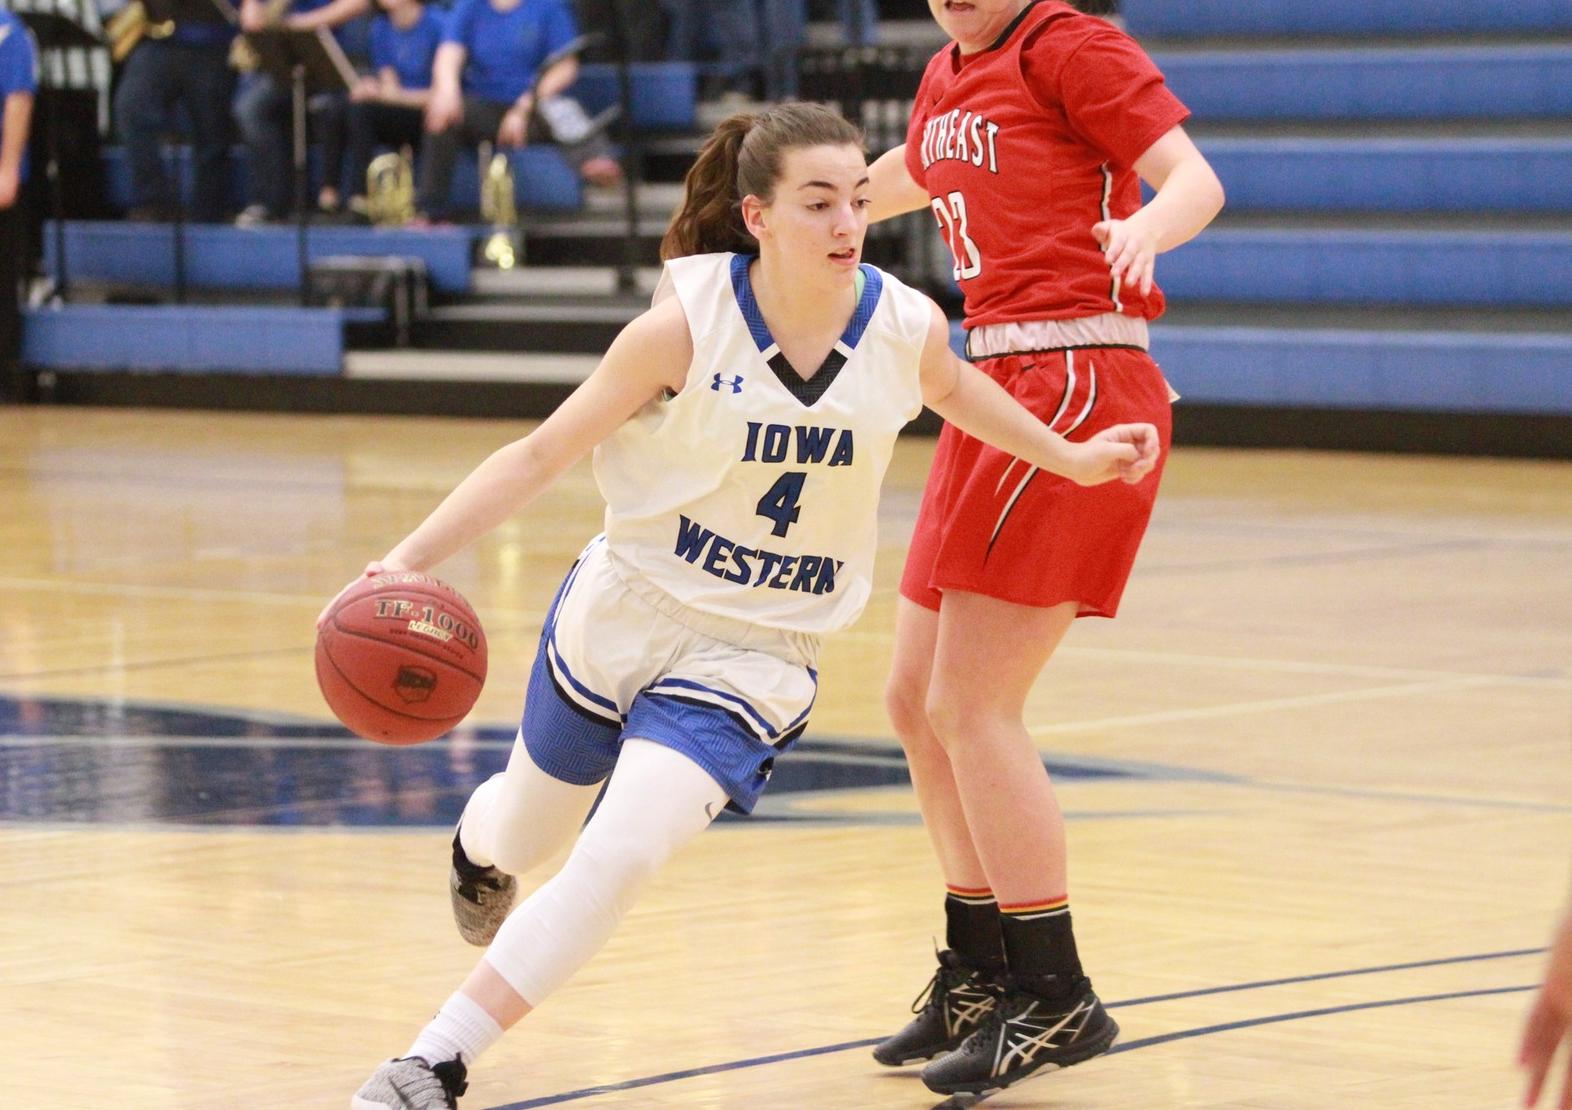 Sophomore Delia Ania-Gaja came up big down the stretch with 10 points, 7 assists and 4 rebounds for the win over top-ranked Kirkwood.